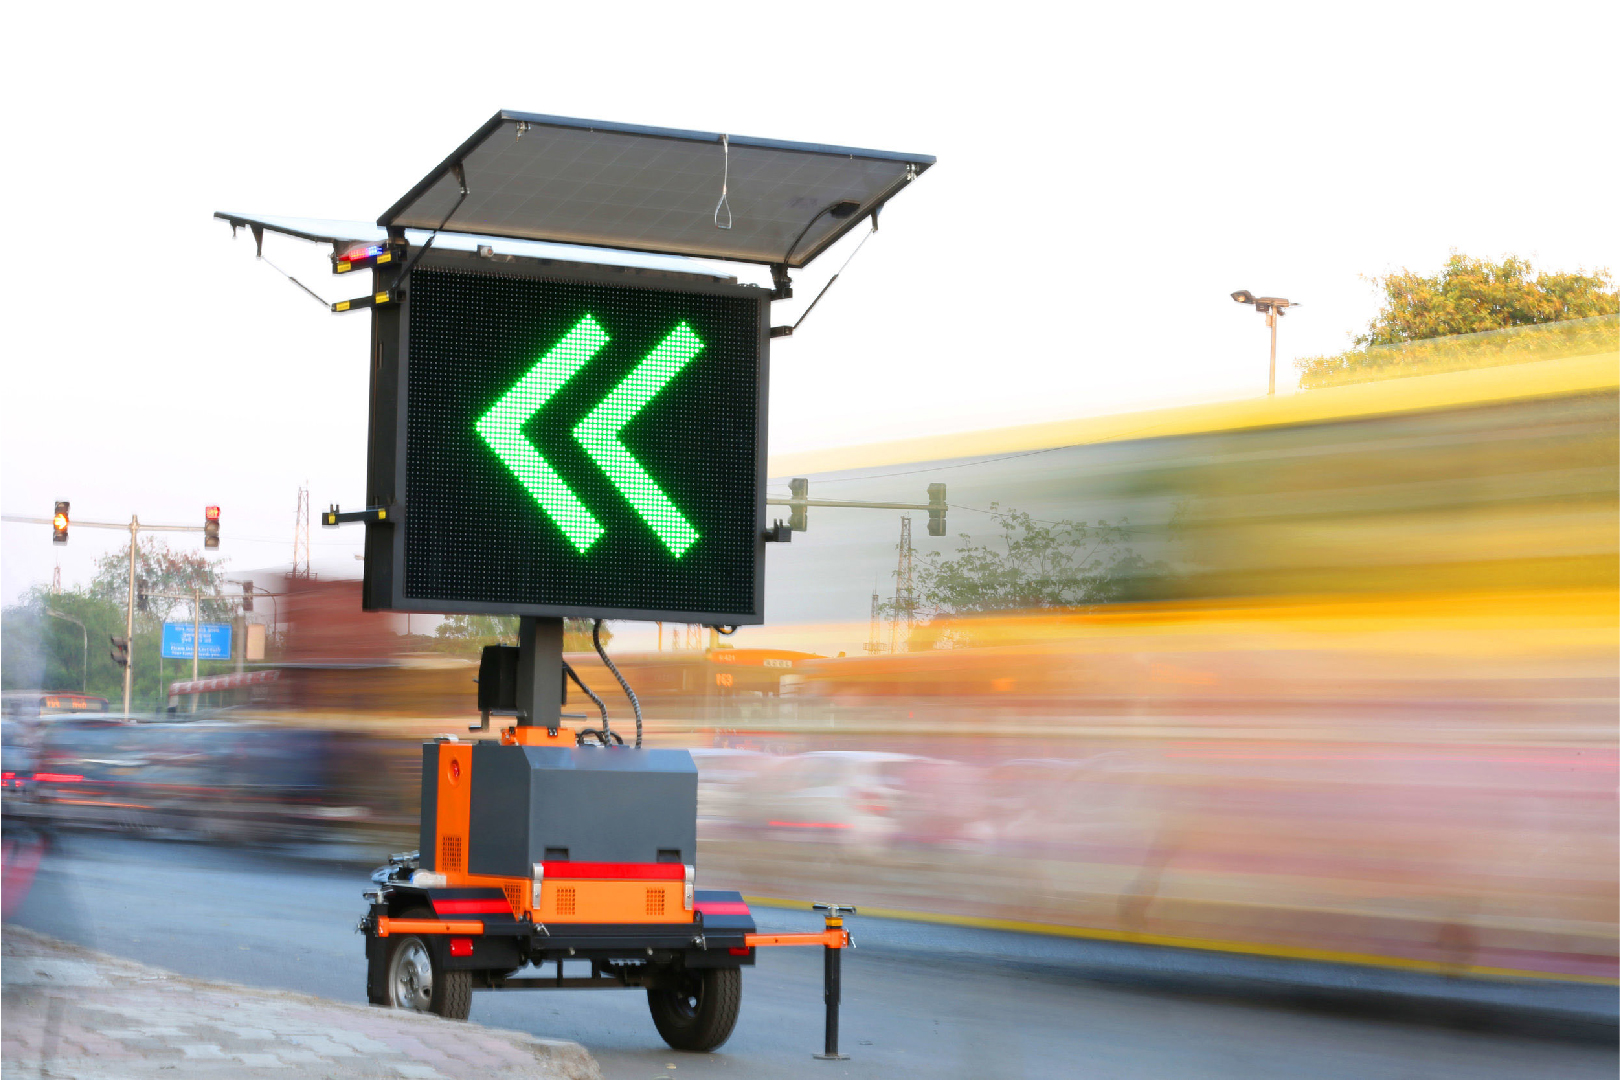 Supply & Installation of Portable Variable Message Signs, Traffic Count Systems, & Portable CCTV System